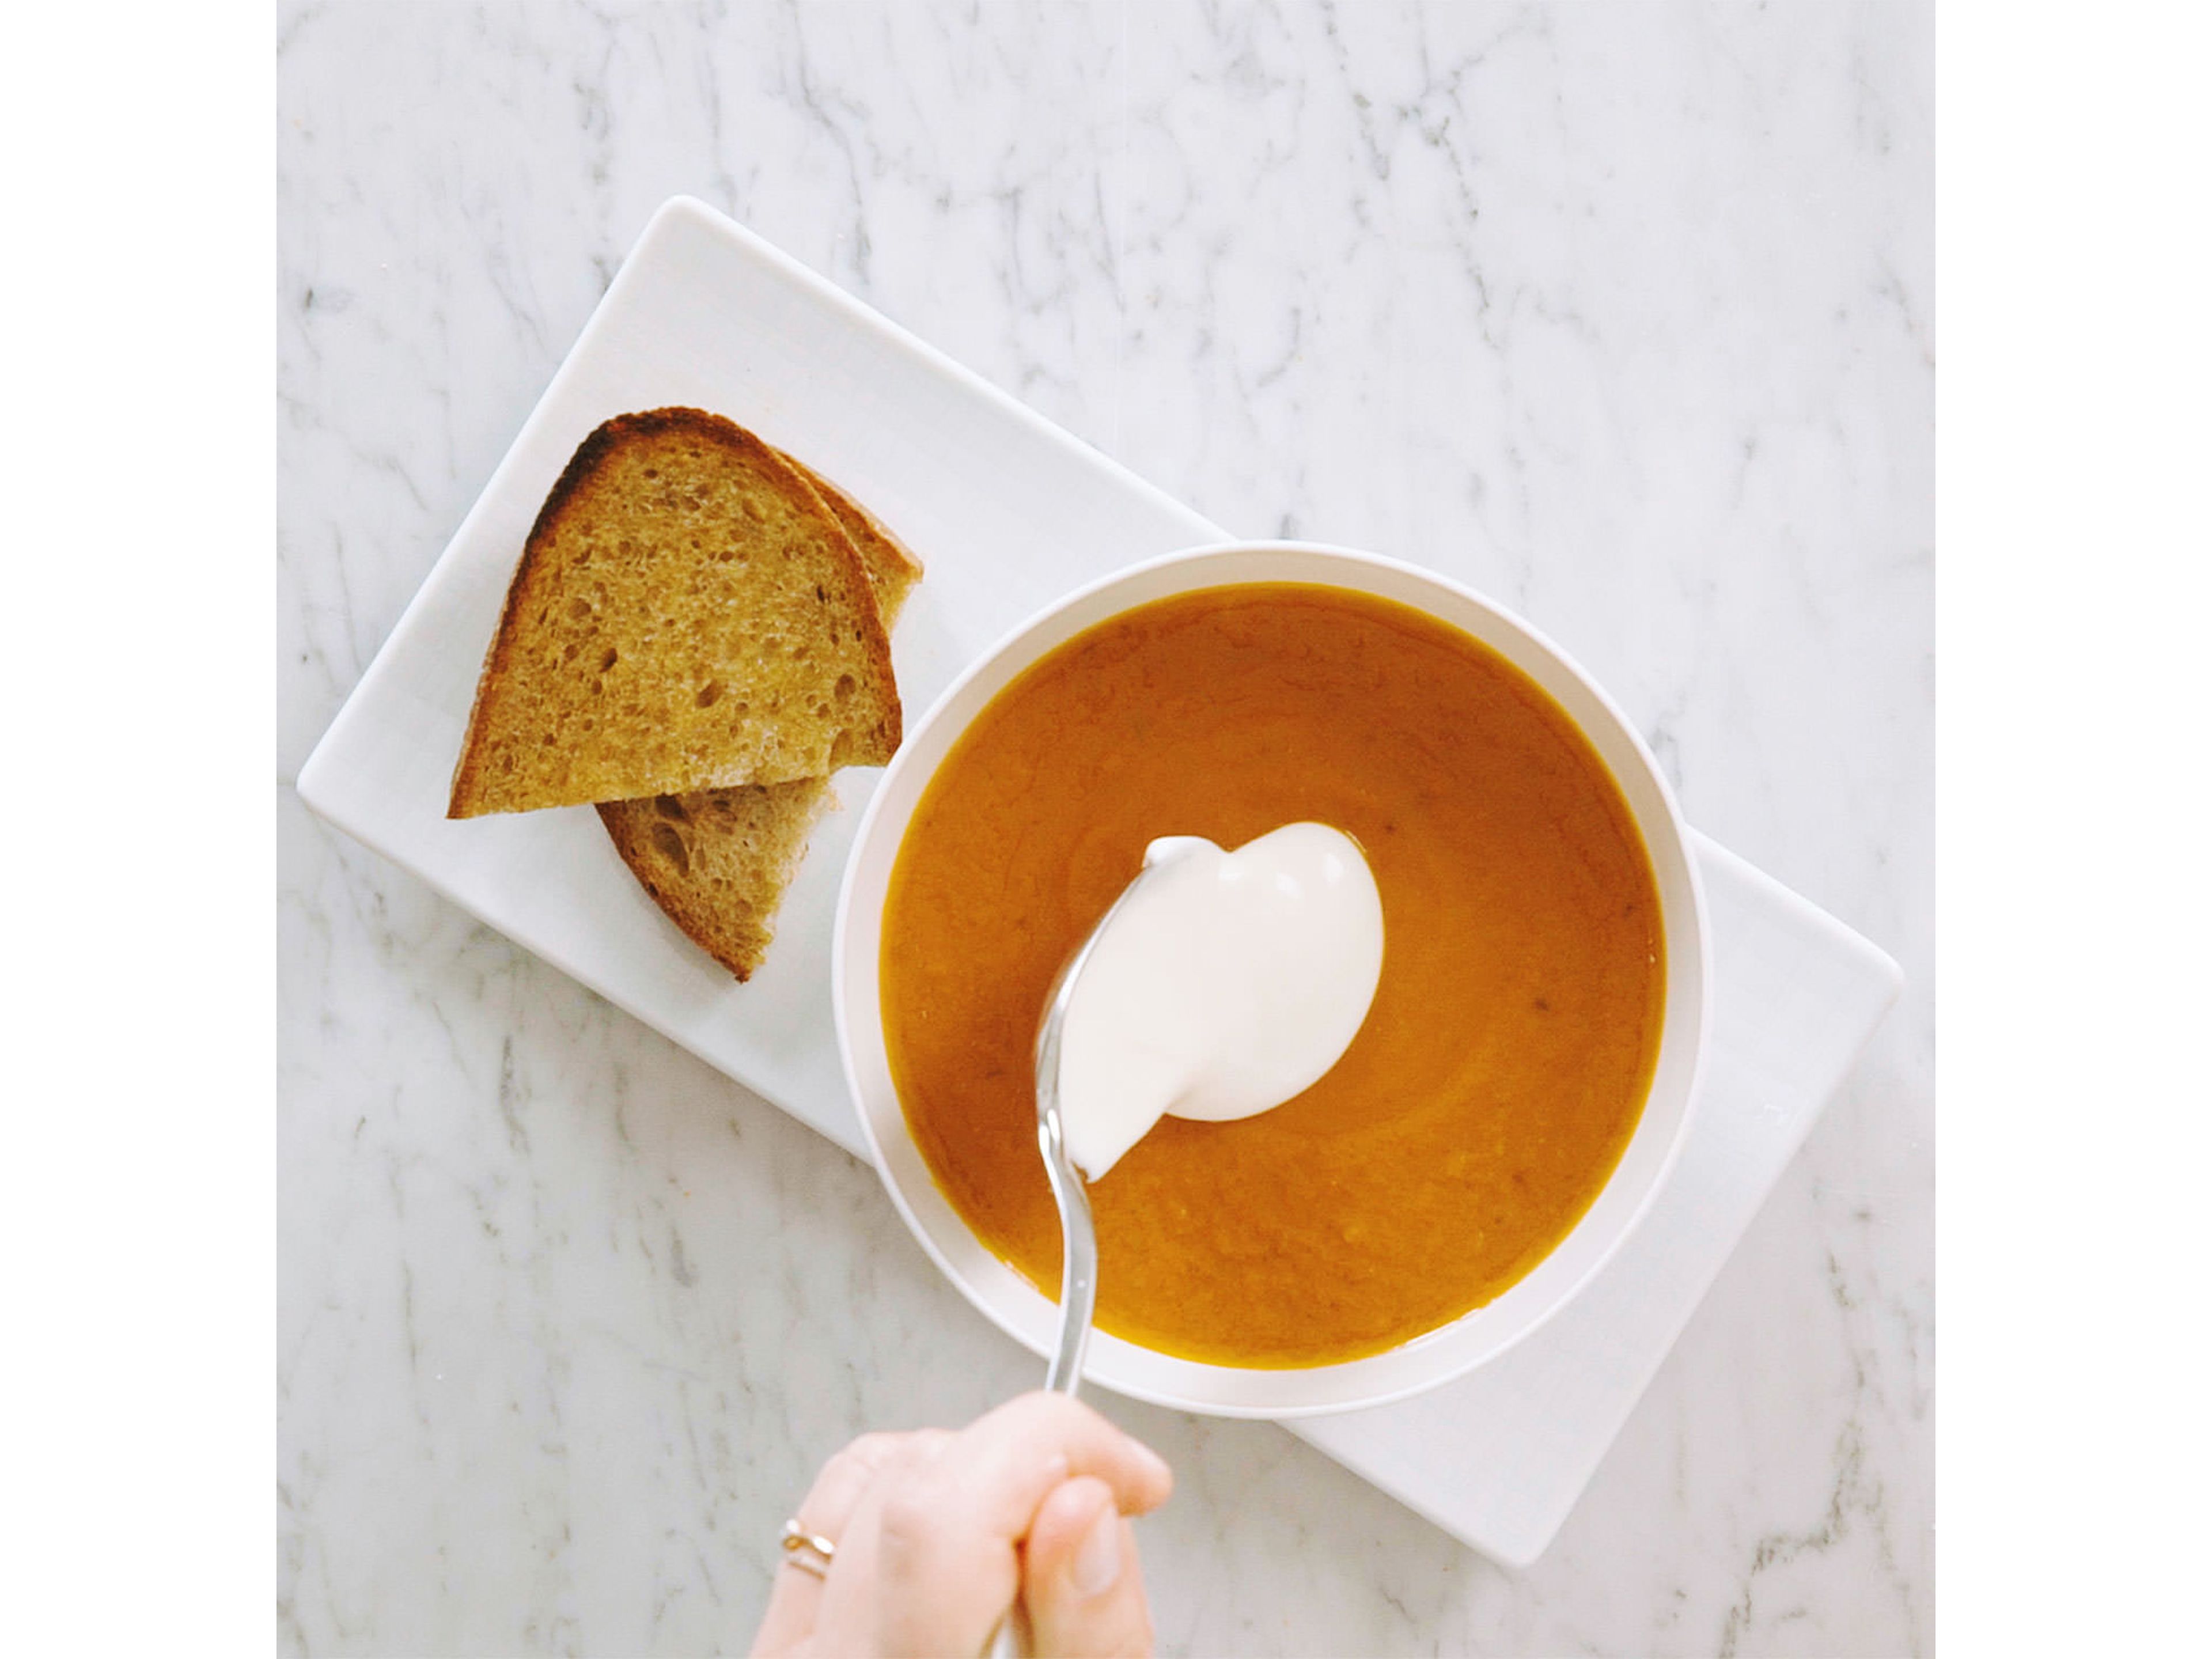 Transfer to a serving bowl and dollop with yogurt alternative. If you like, garnish with pumpkin seed oil. Serve with slices of whole wheat bread. Enjoy!